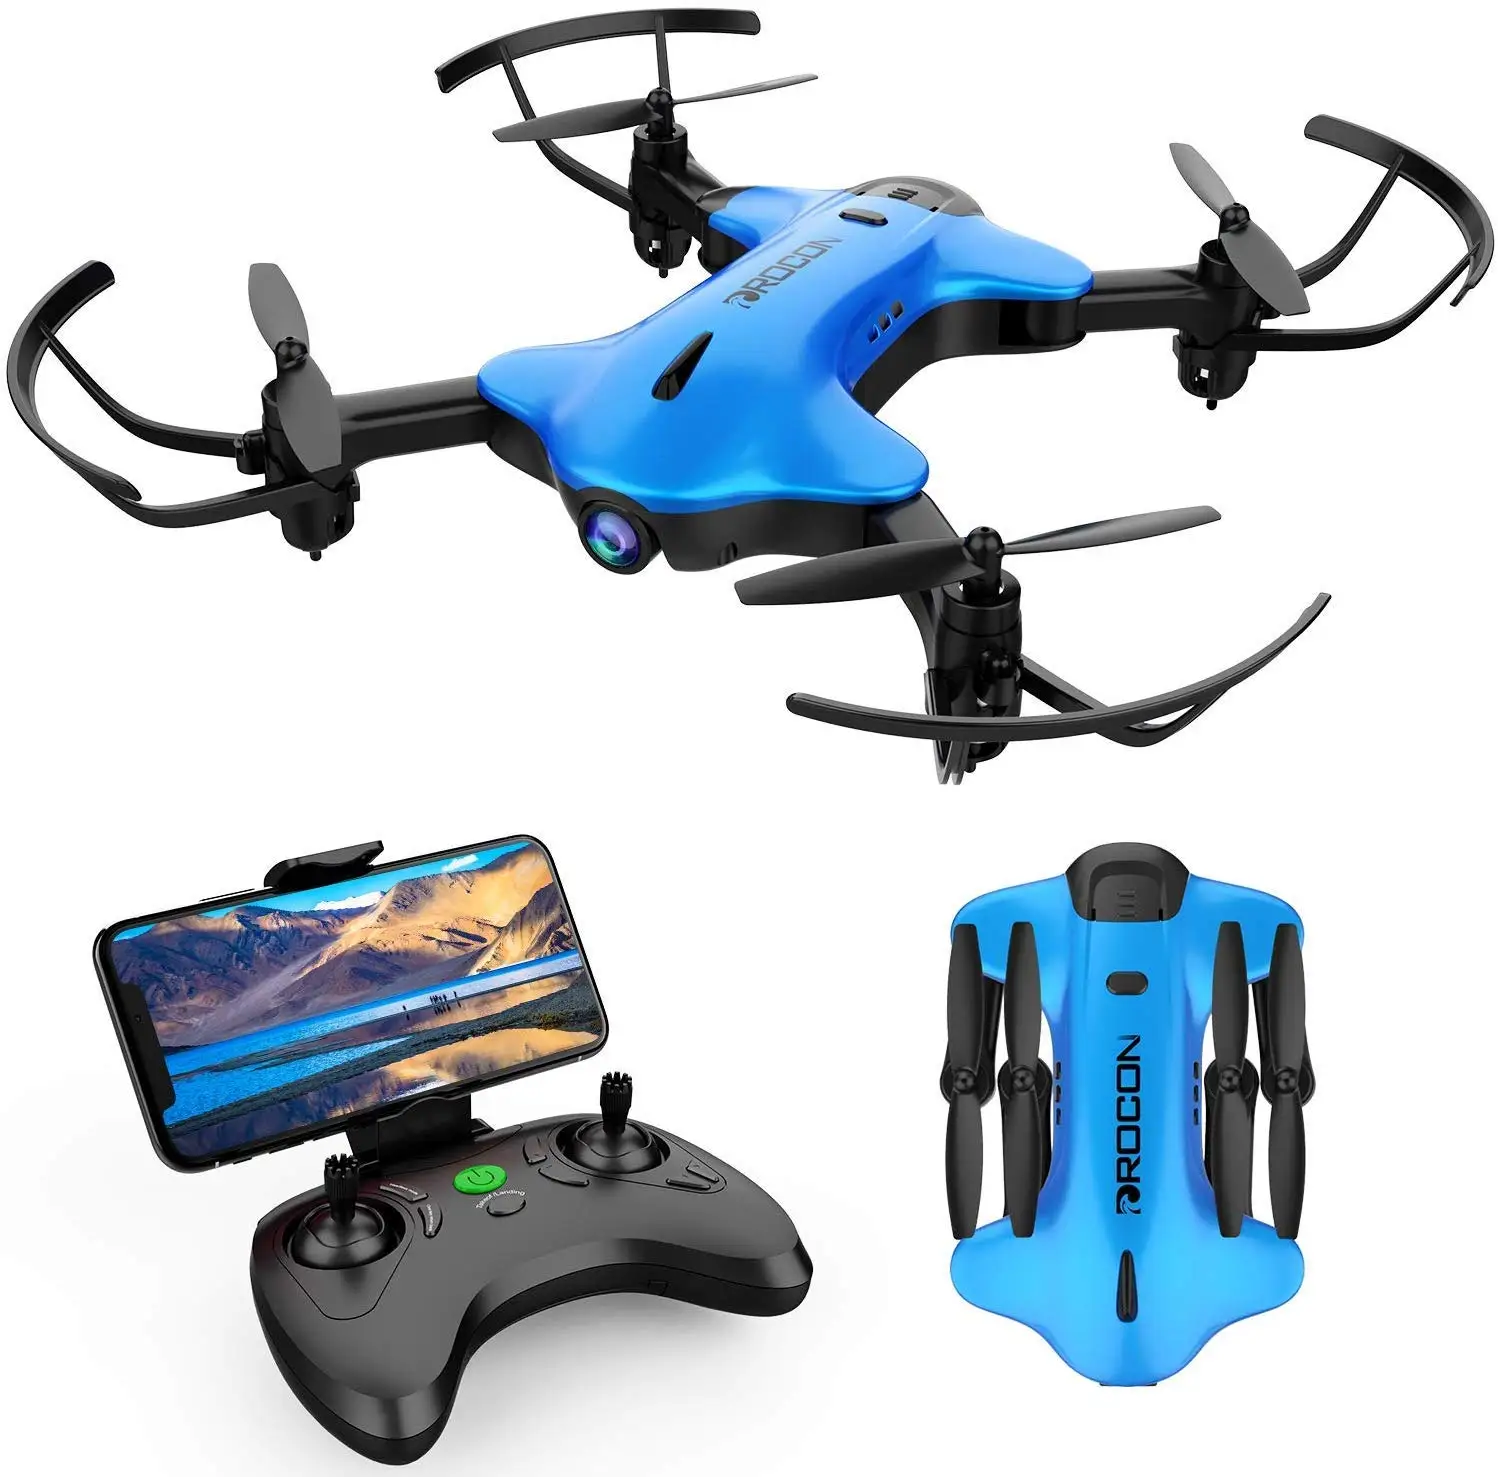 Wholesale Drone Mini For Kids & Beginners - Buy Mini Drone Camera,Mini Drone,Mini Camera Drone Product on Alibaba.com